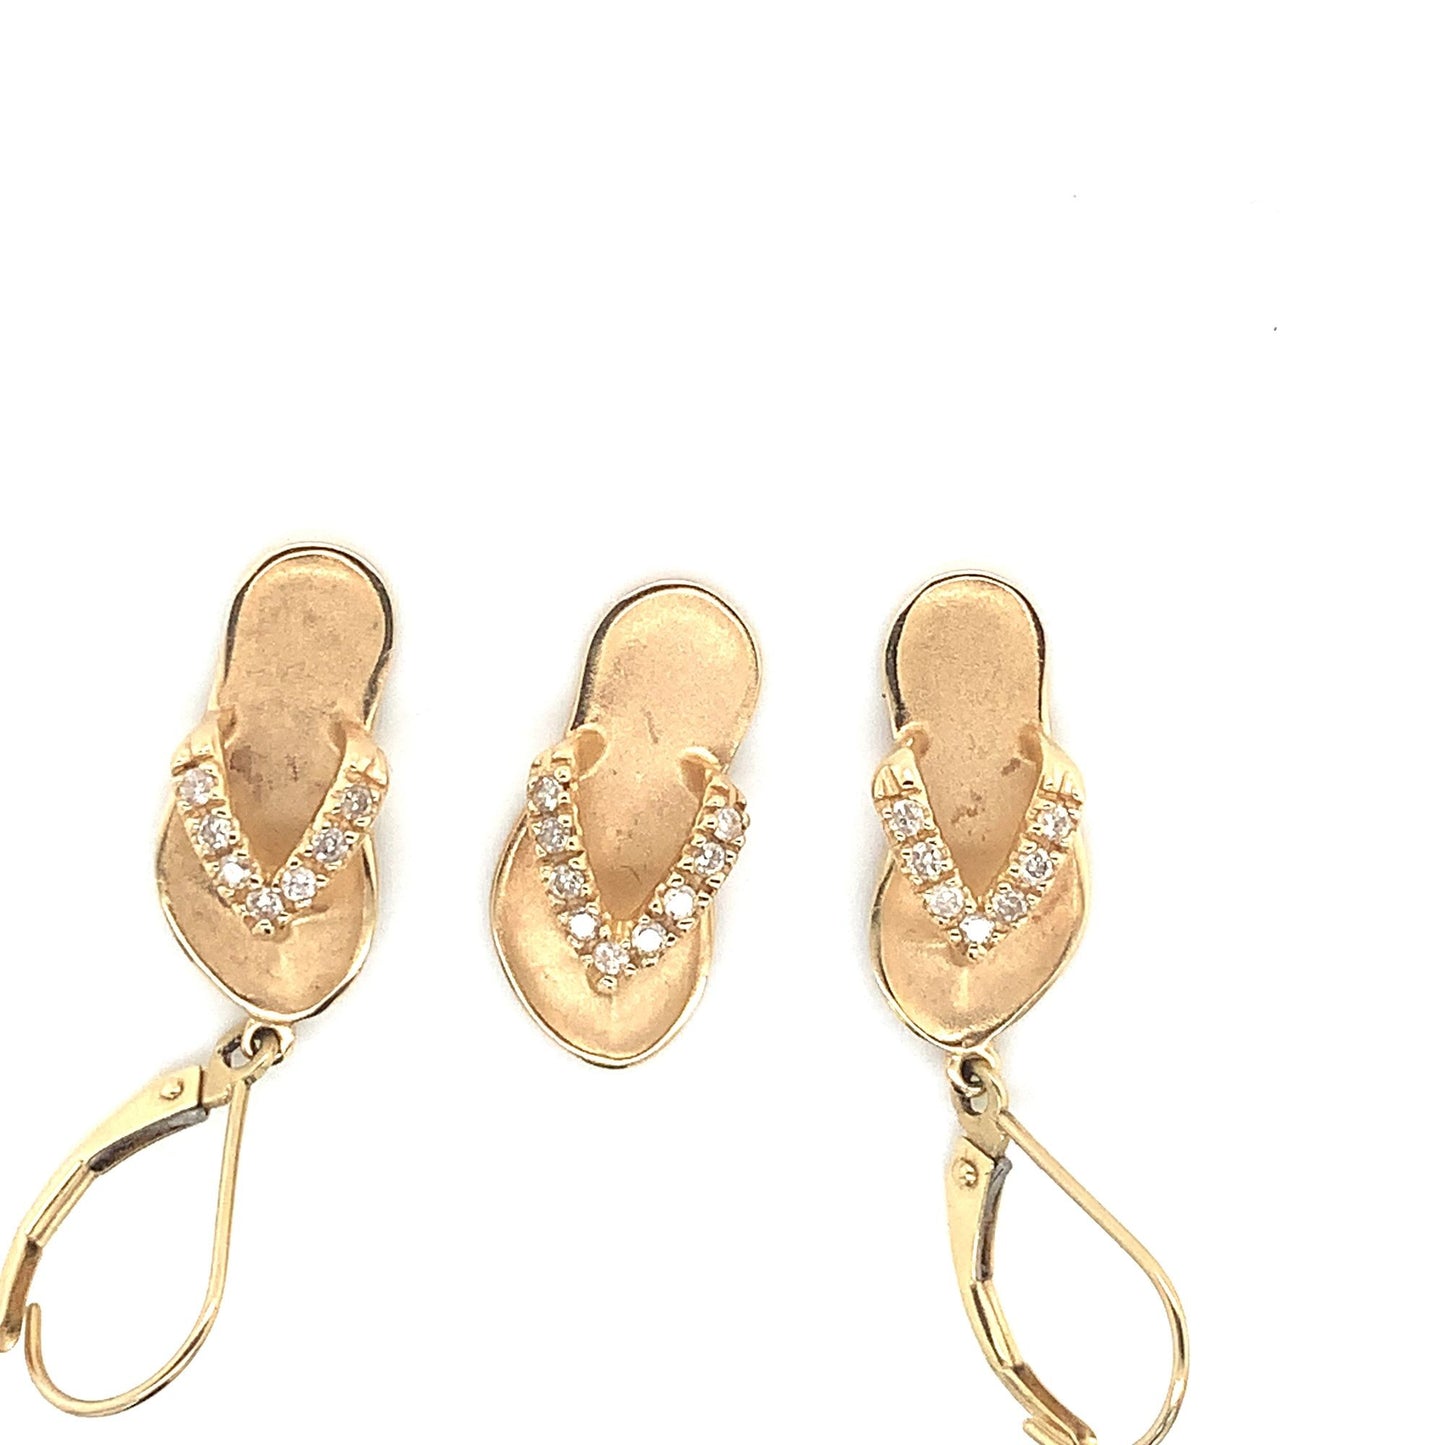 Diamond Sandals Earring and Necklace Set